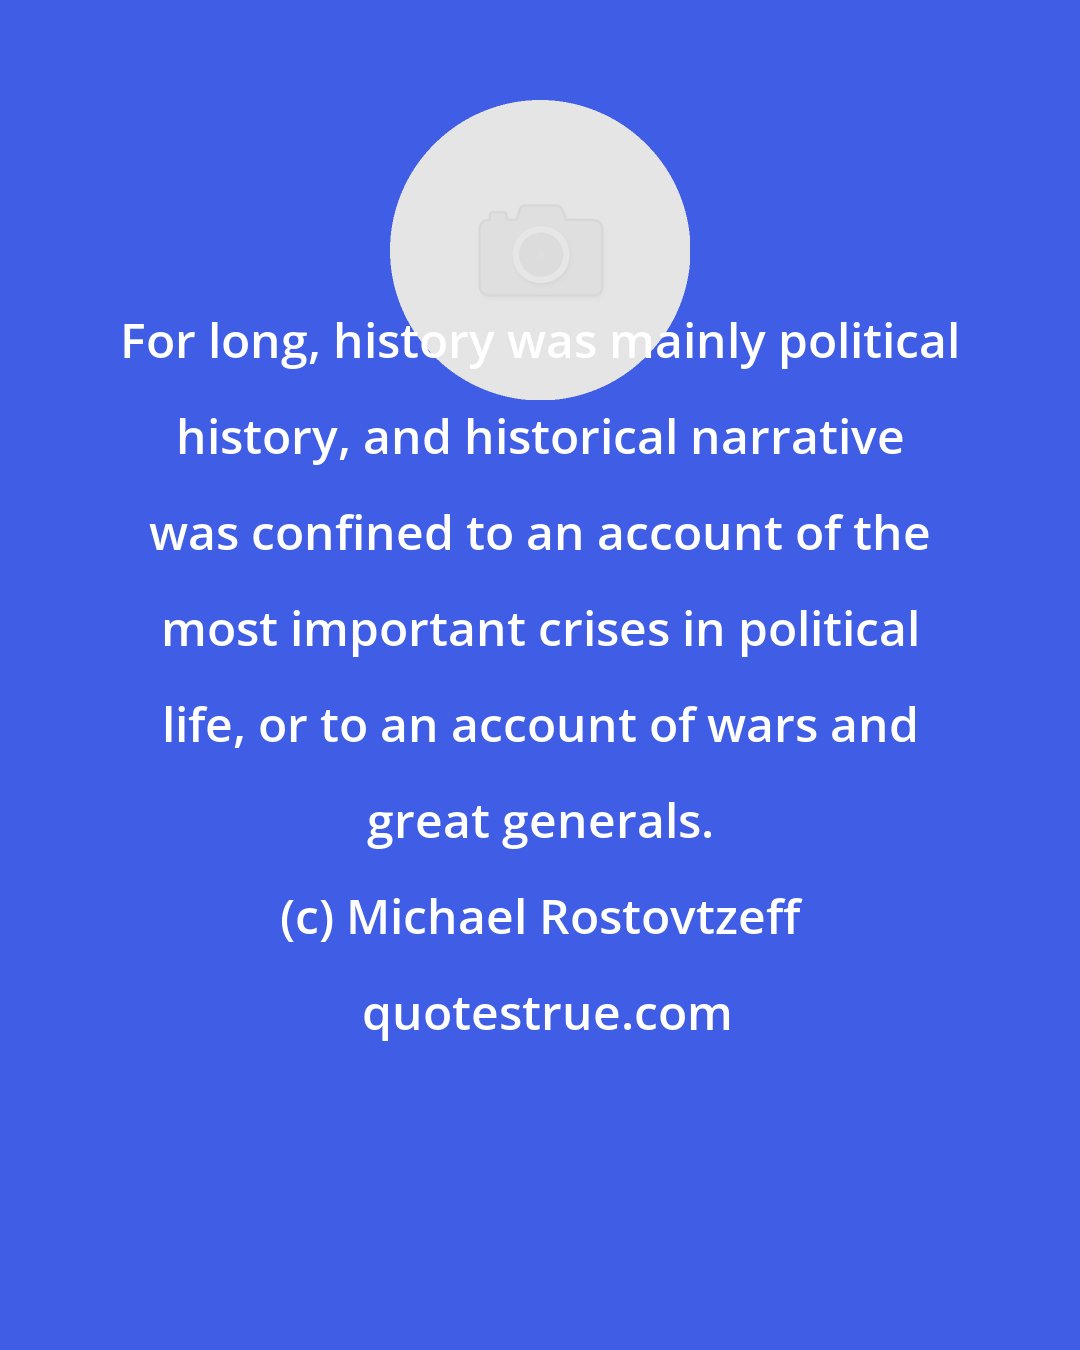 Michael Rostovtzeff: For long, history was mainly political history, and historical narrative was confined to an account of the most important crises in political life, or to an account of wars and great generals.